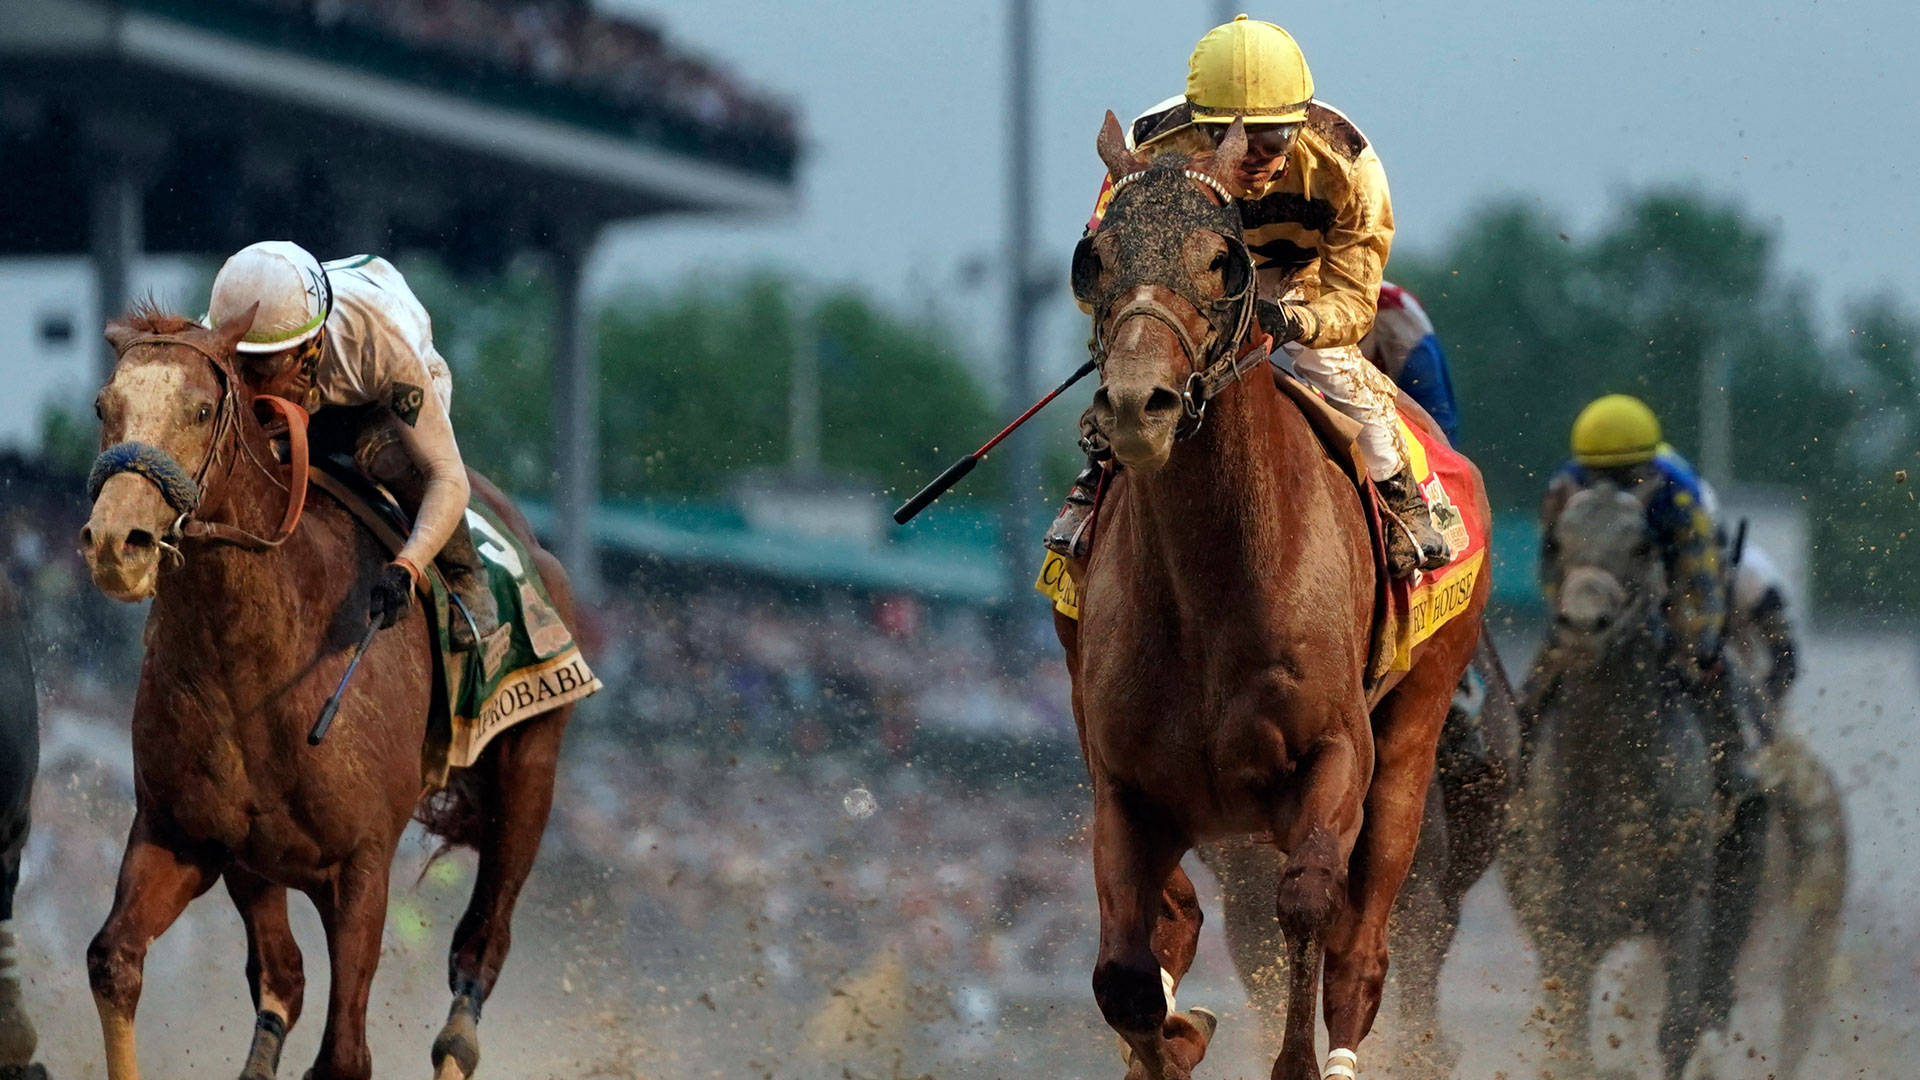 Thrilling Horse Race At The 2019 Kentucky Derby Background